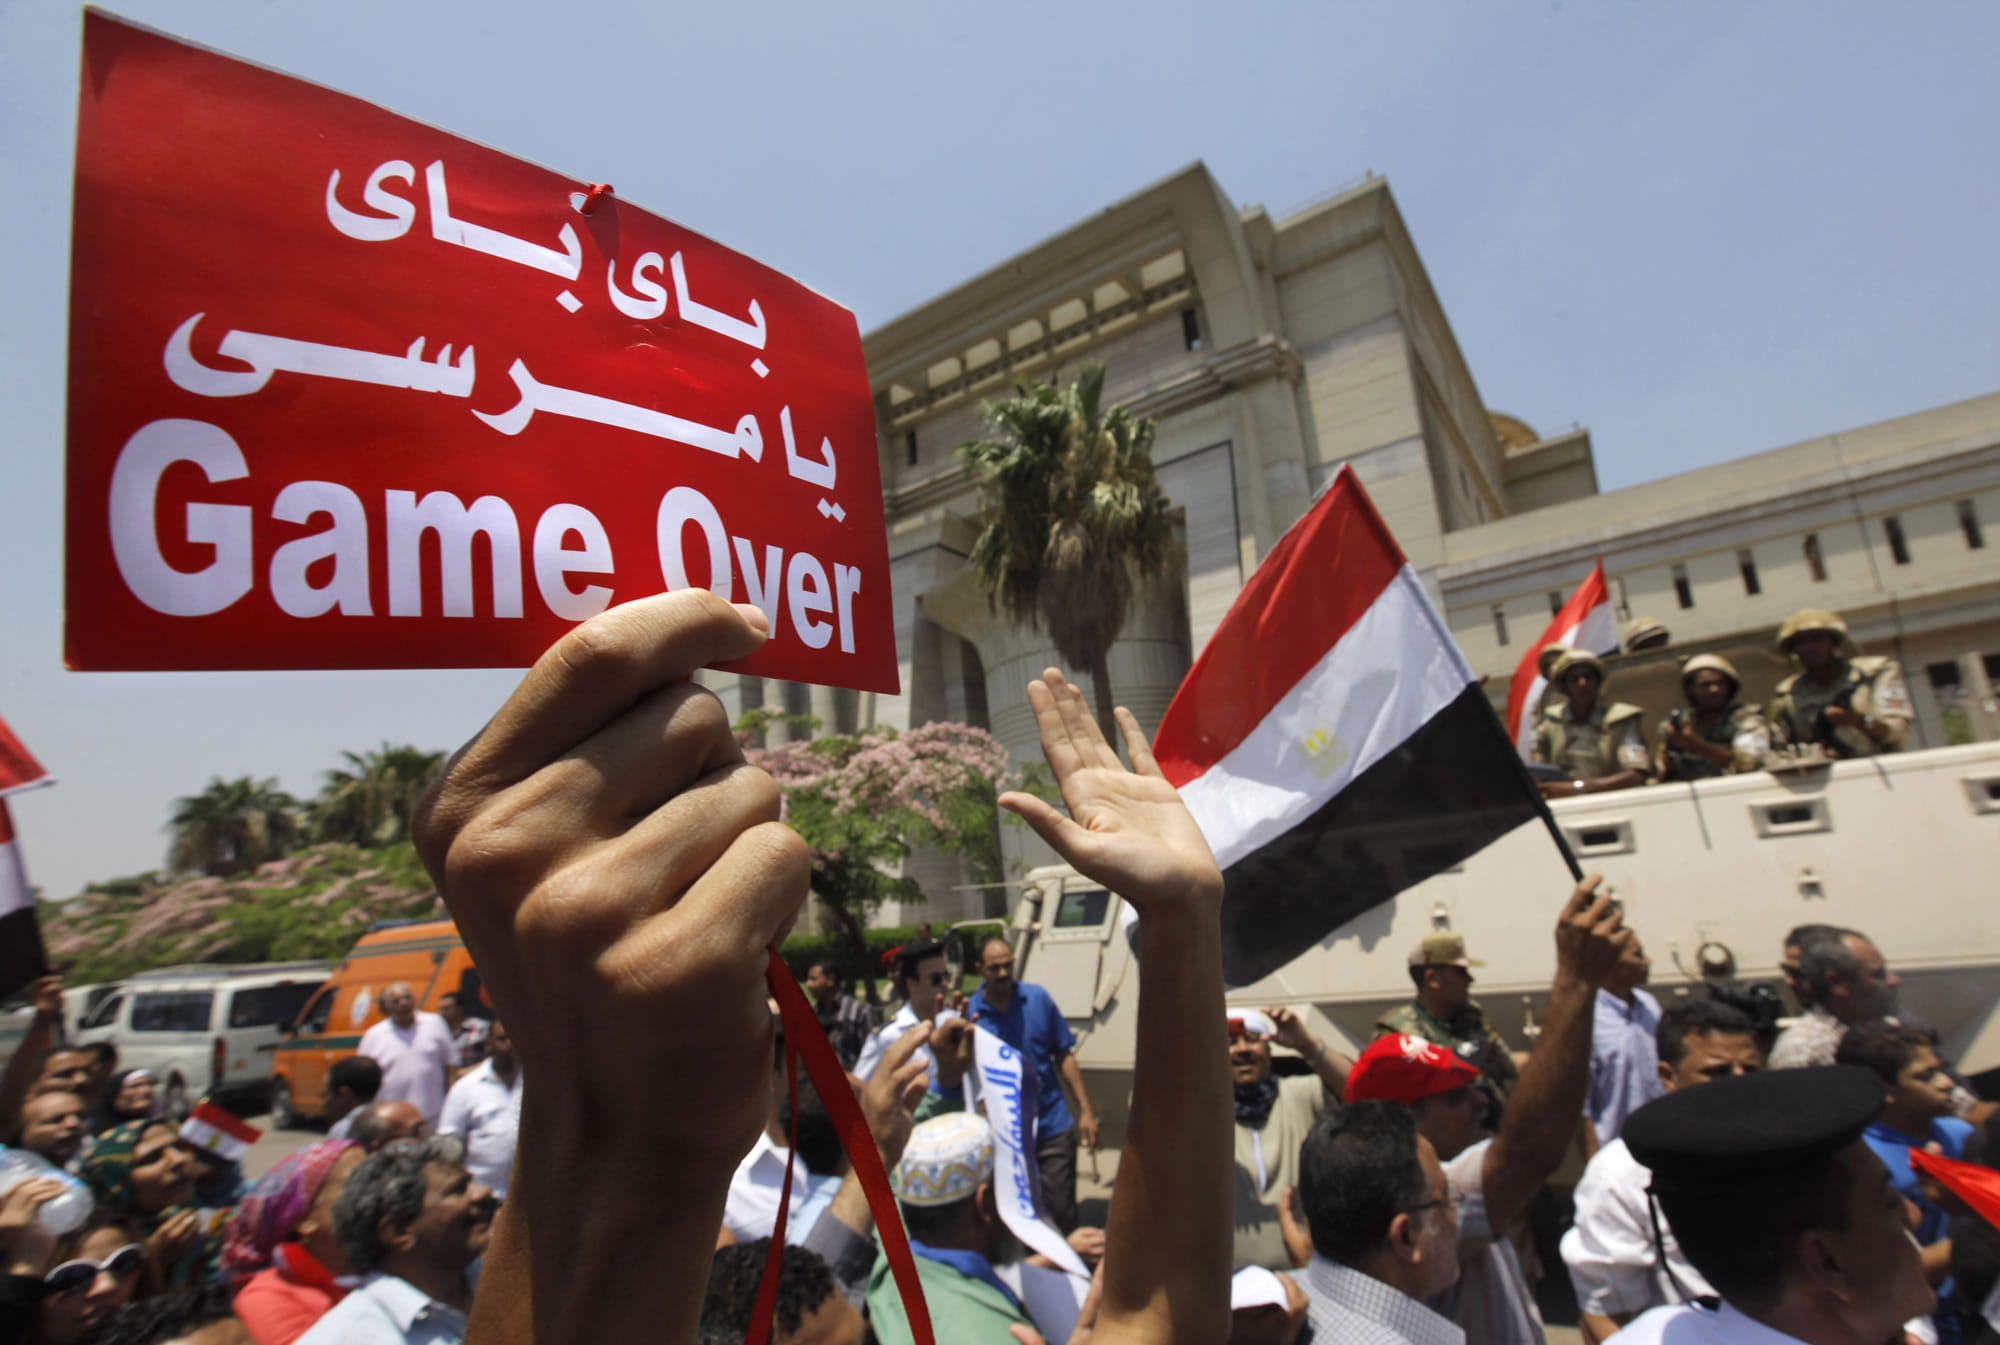 Egyptians celebrate in front of the constitutional court after Egypt's chief justice Adly Mansour was sworn in as the nation's interim president Thursday.